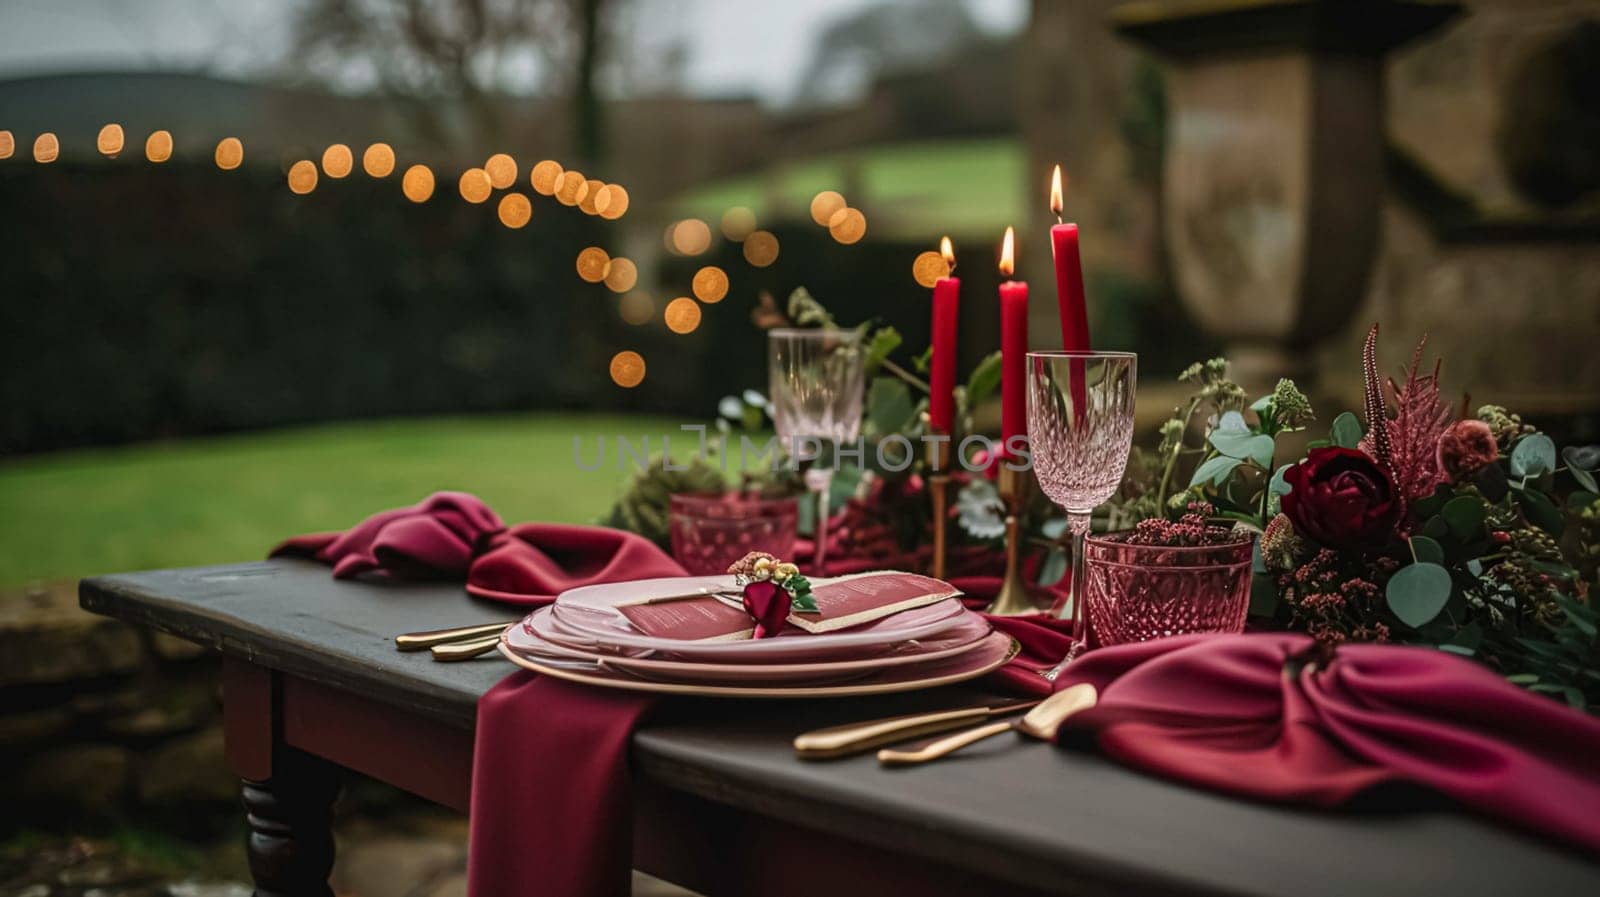 Festive table setting with cutlery, candles and beautiful red flowers in a vase.